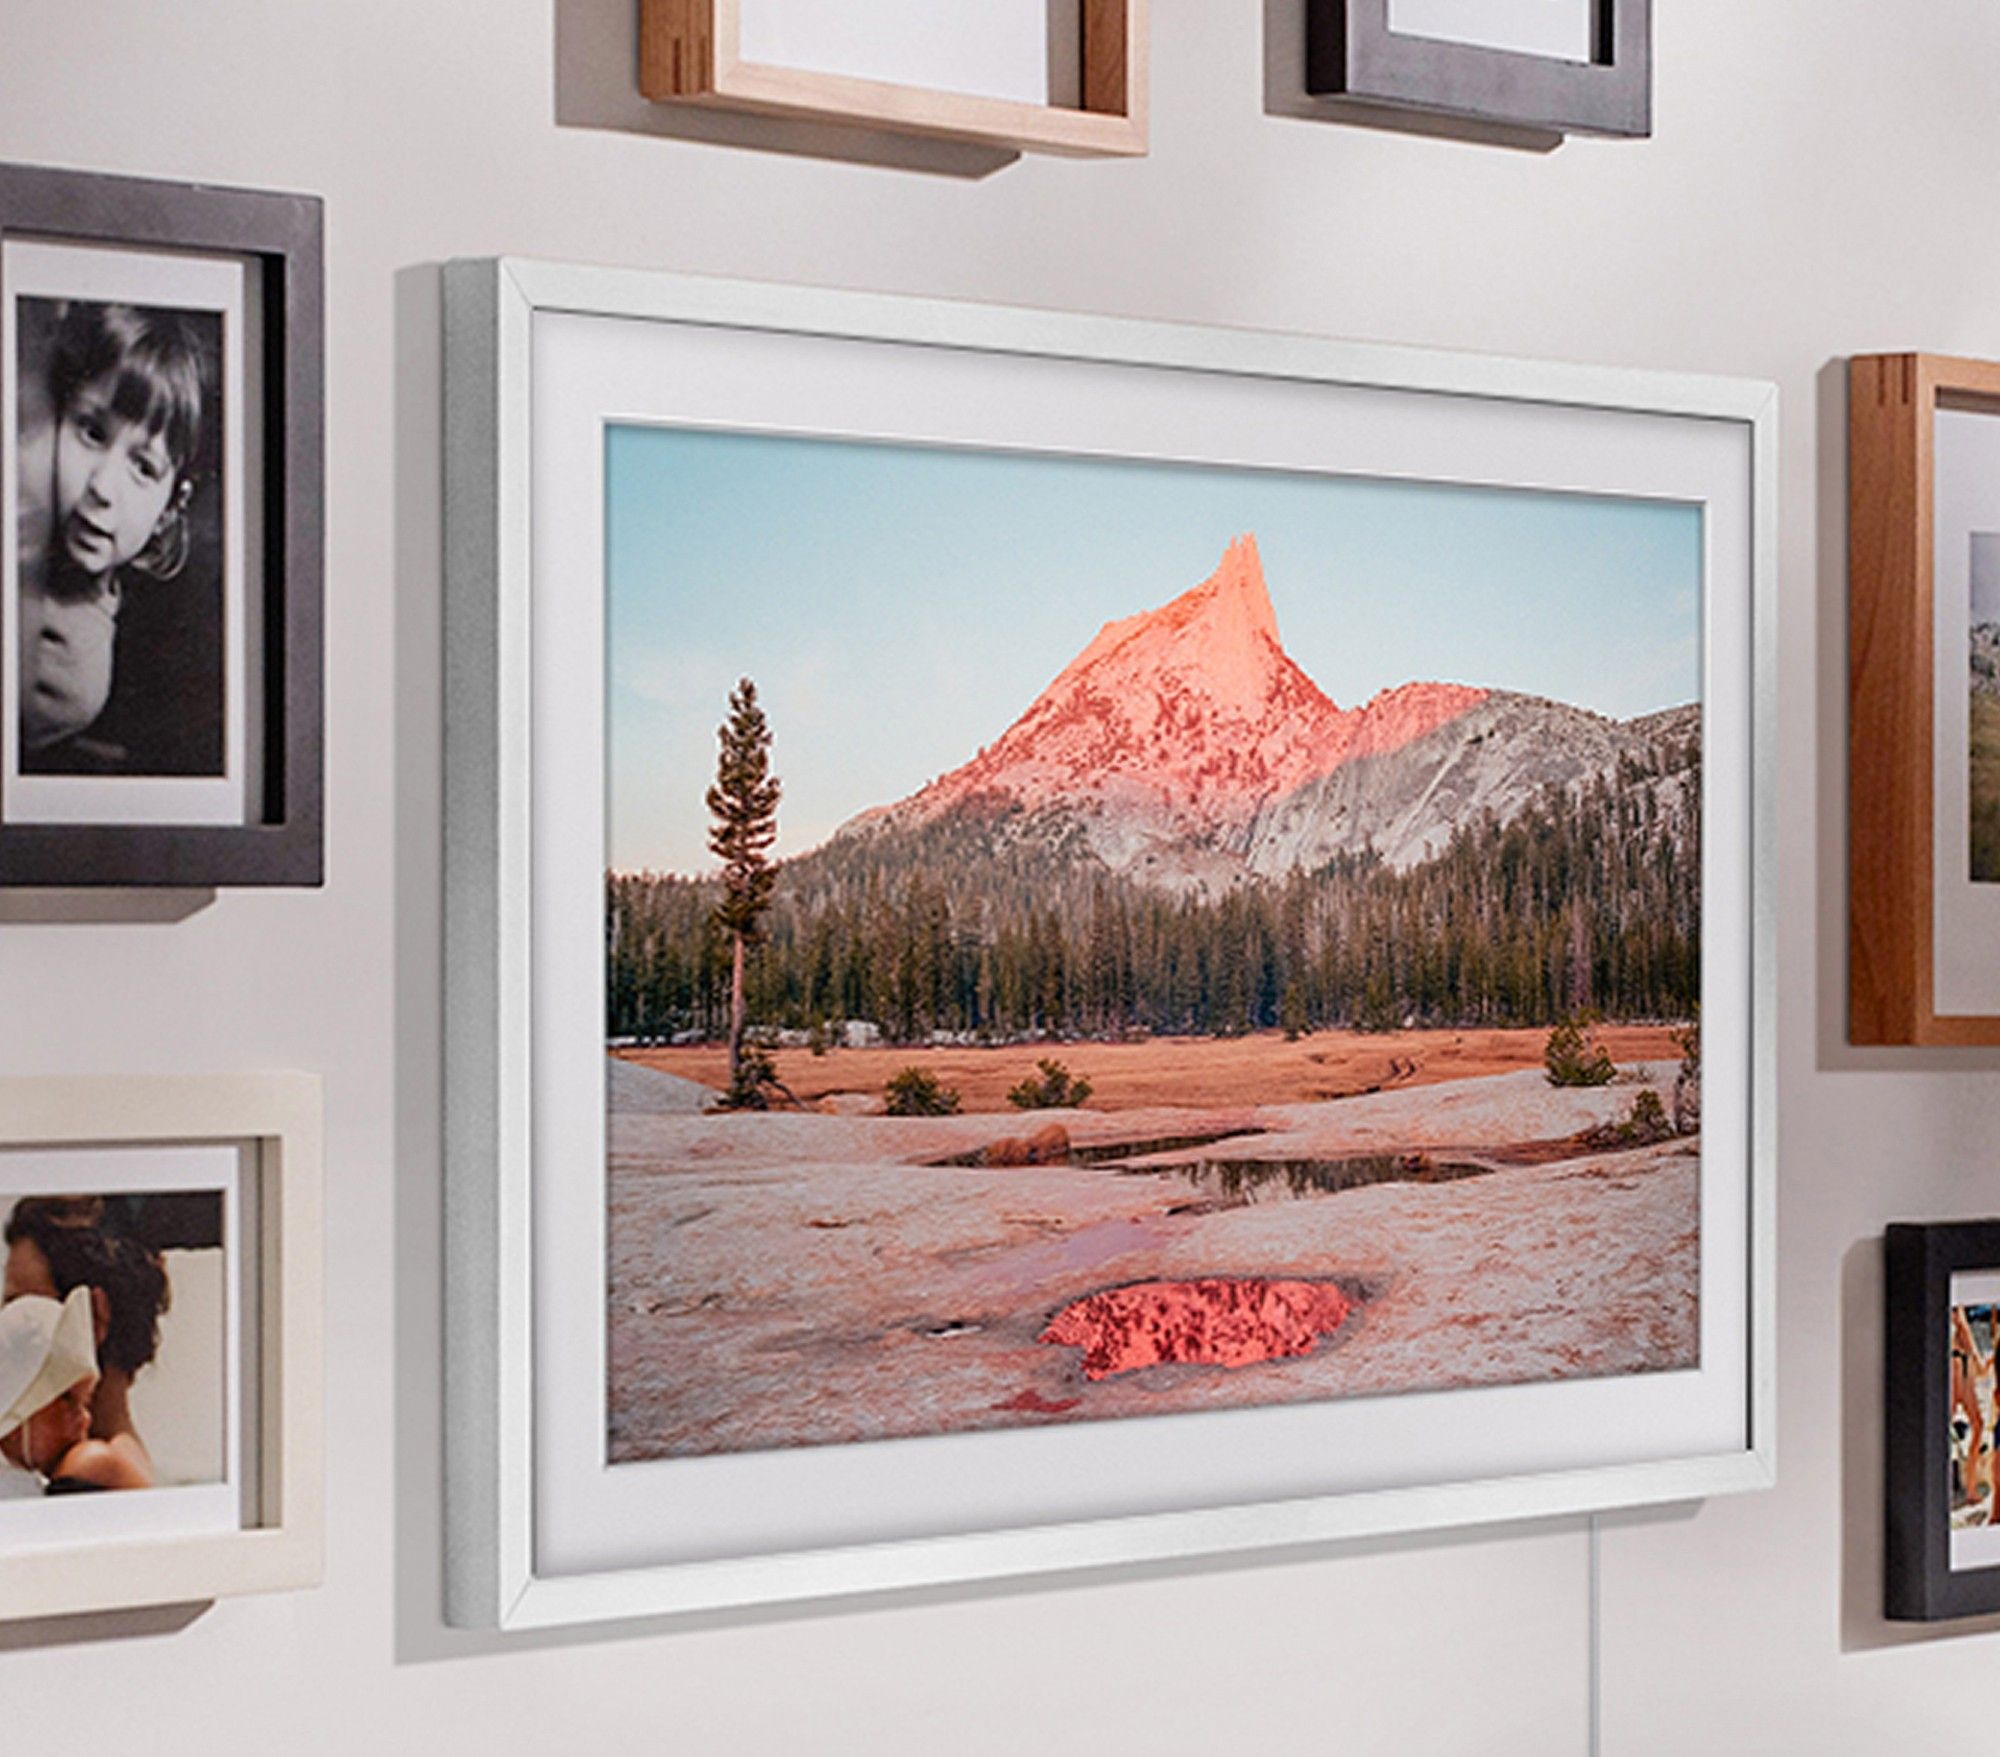 samsung the frame pictured mounted on the wall with artwork a photograph shown on-screen